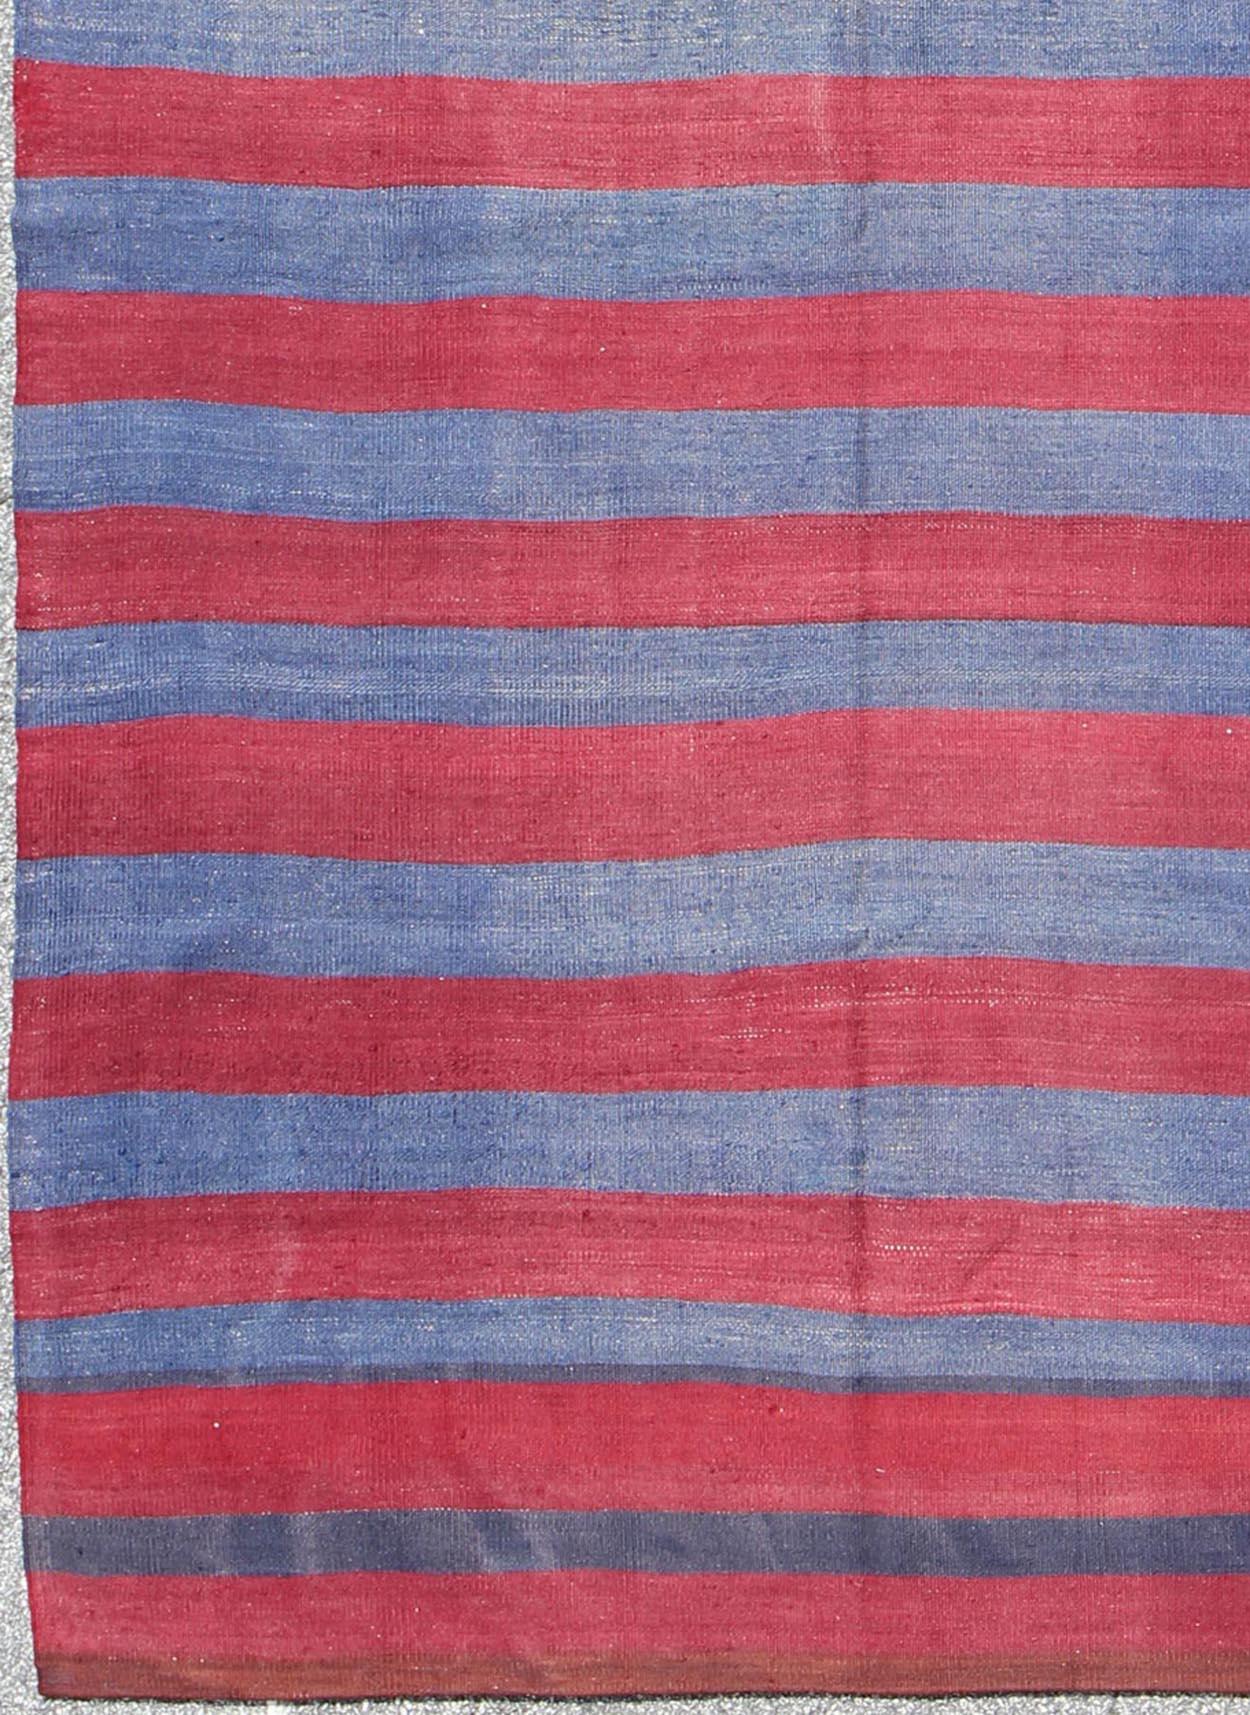 Hand-Woven Vintage Striped Turkish Kilim with Casual Modern Design in Red and Blue For Sale